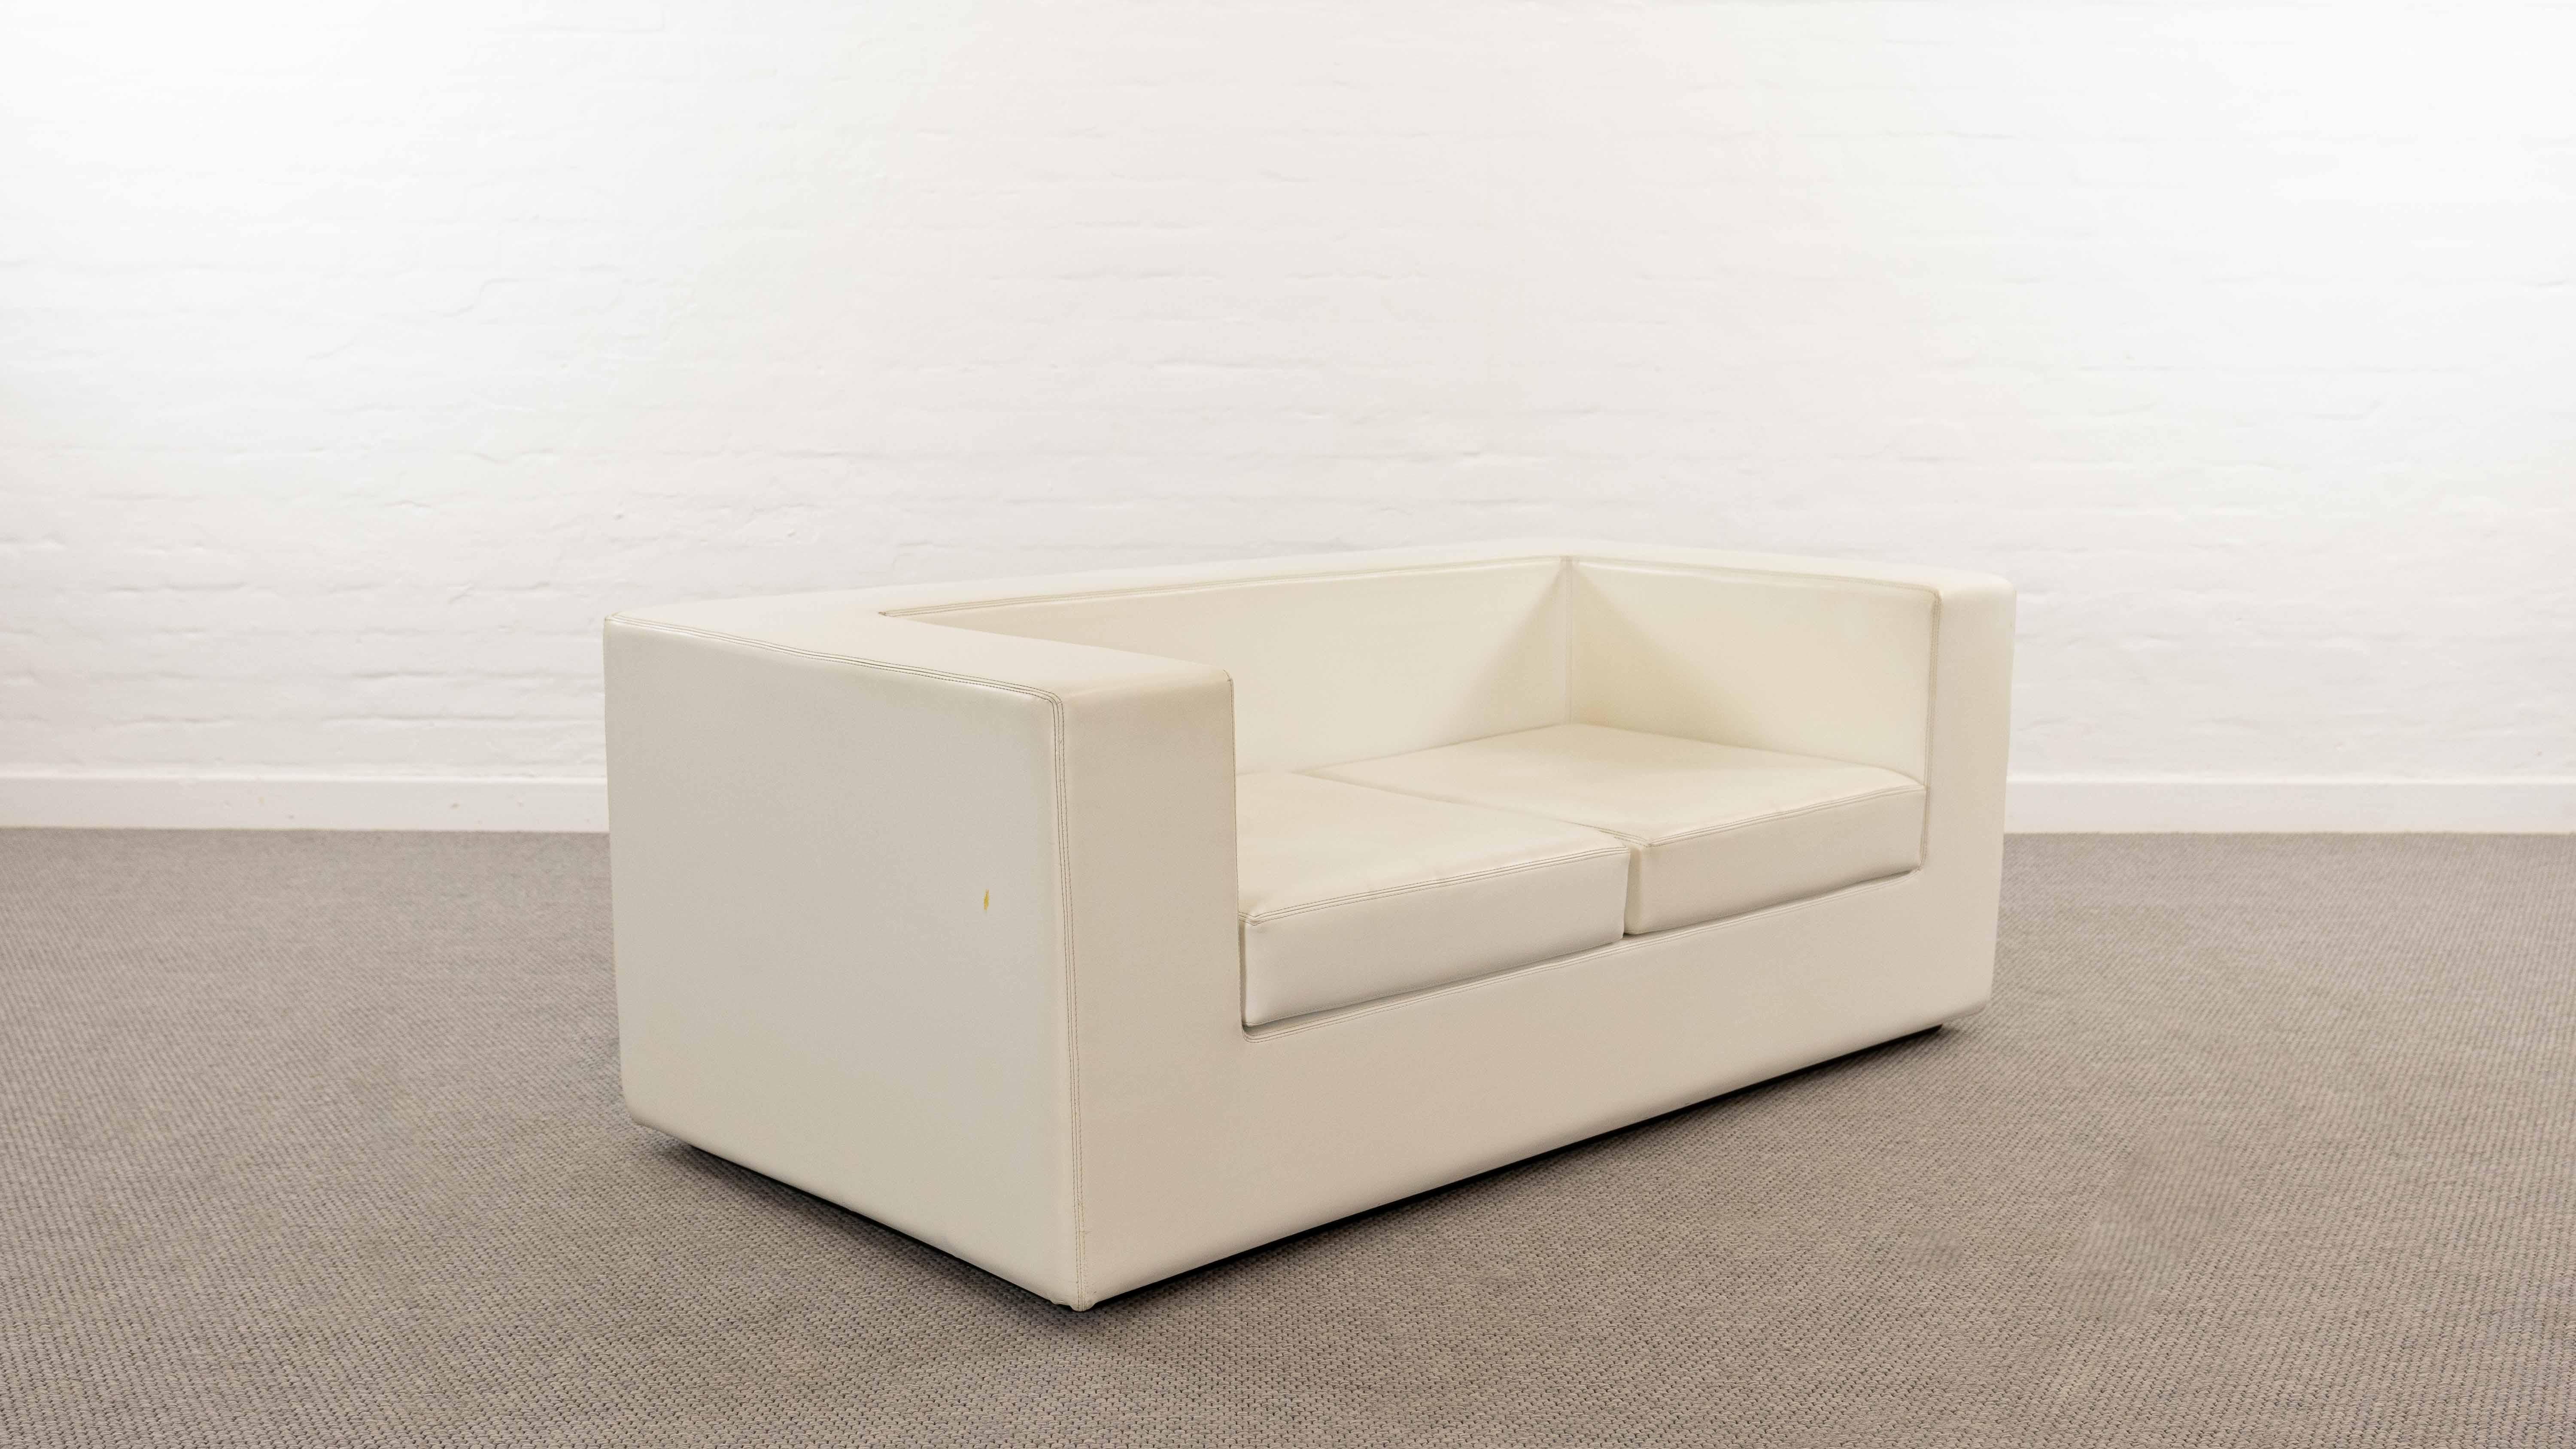 Space Age Throw Away Sofa by Willie Landels for Zanotta 1965 in White Vinyl For Sale